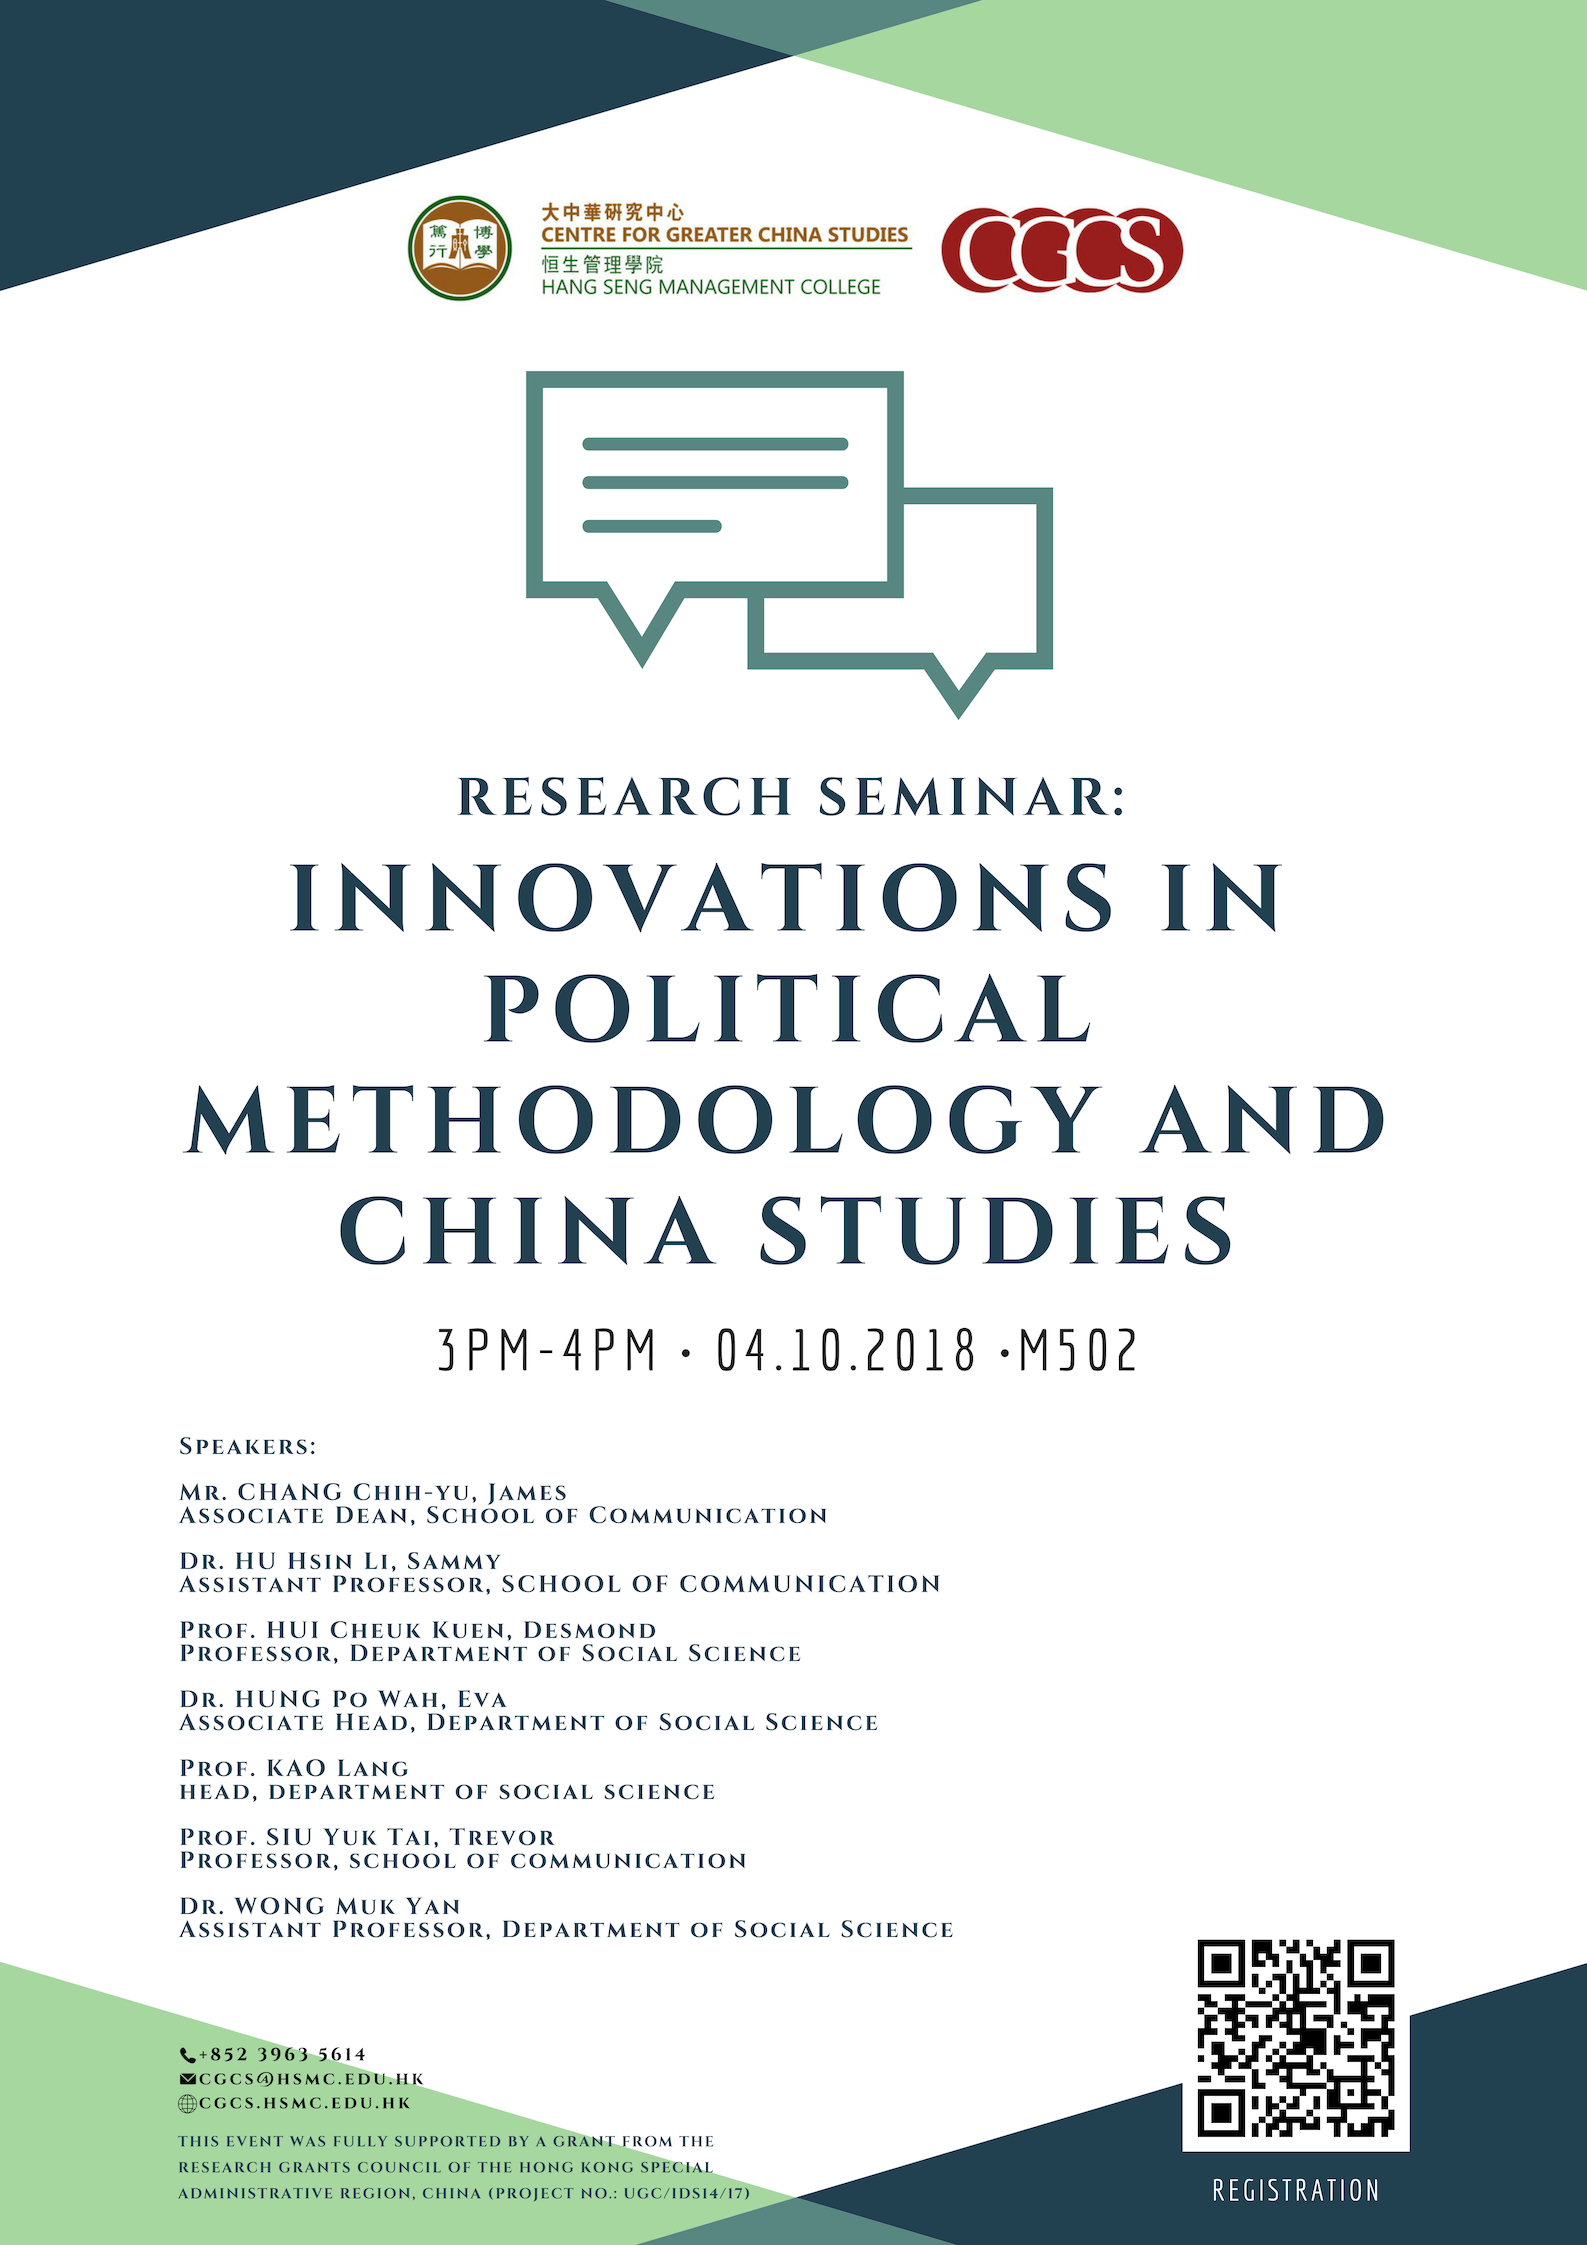 Research Seminar: Innovation in Political Methodology and China Studies